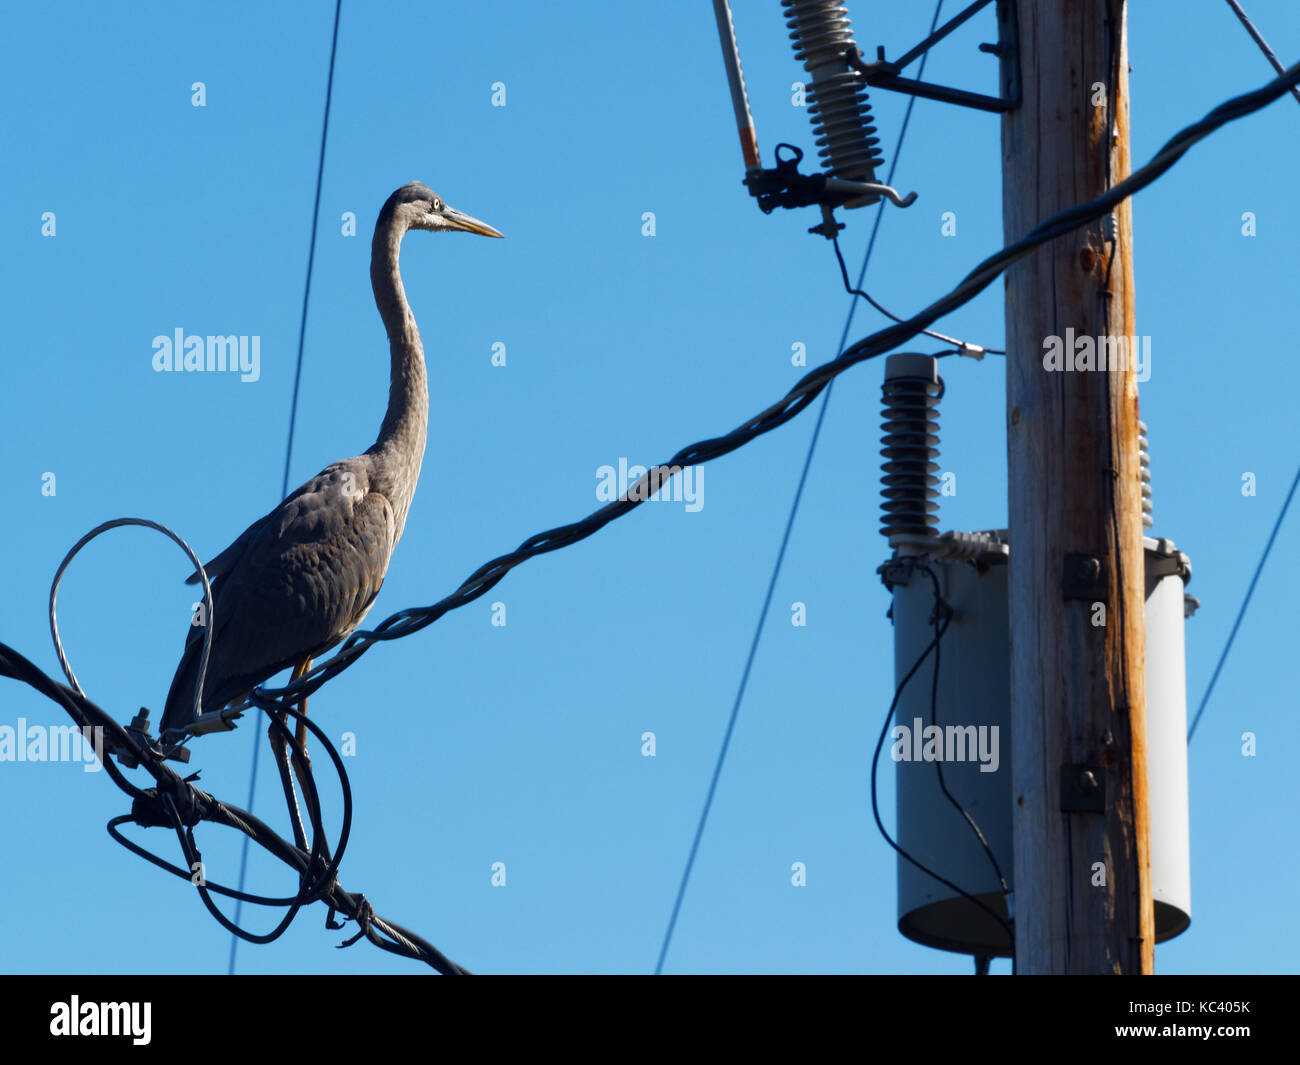 Quebec,Canada. A Grey Heron sitting on electric wires Stock Photo